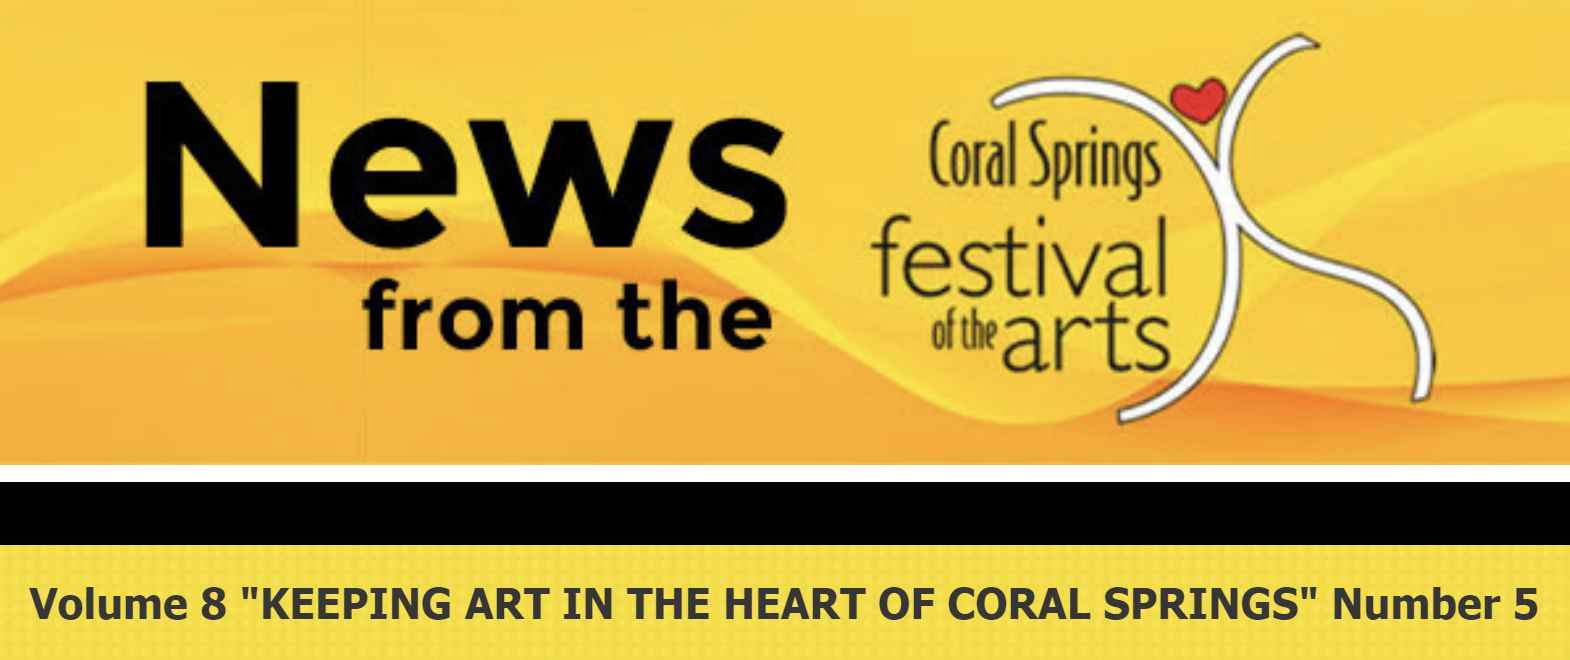 Join us for the Annual Coral Springs Festival of the Arts & Gardenfest on Saturday, March 16th & Sunday, March 17th from 10am to 5pm at The Walk in Coral Springs